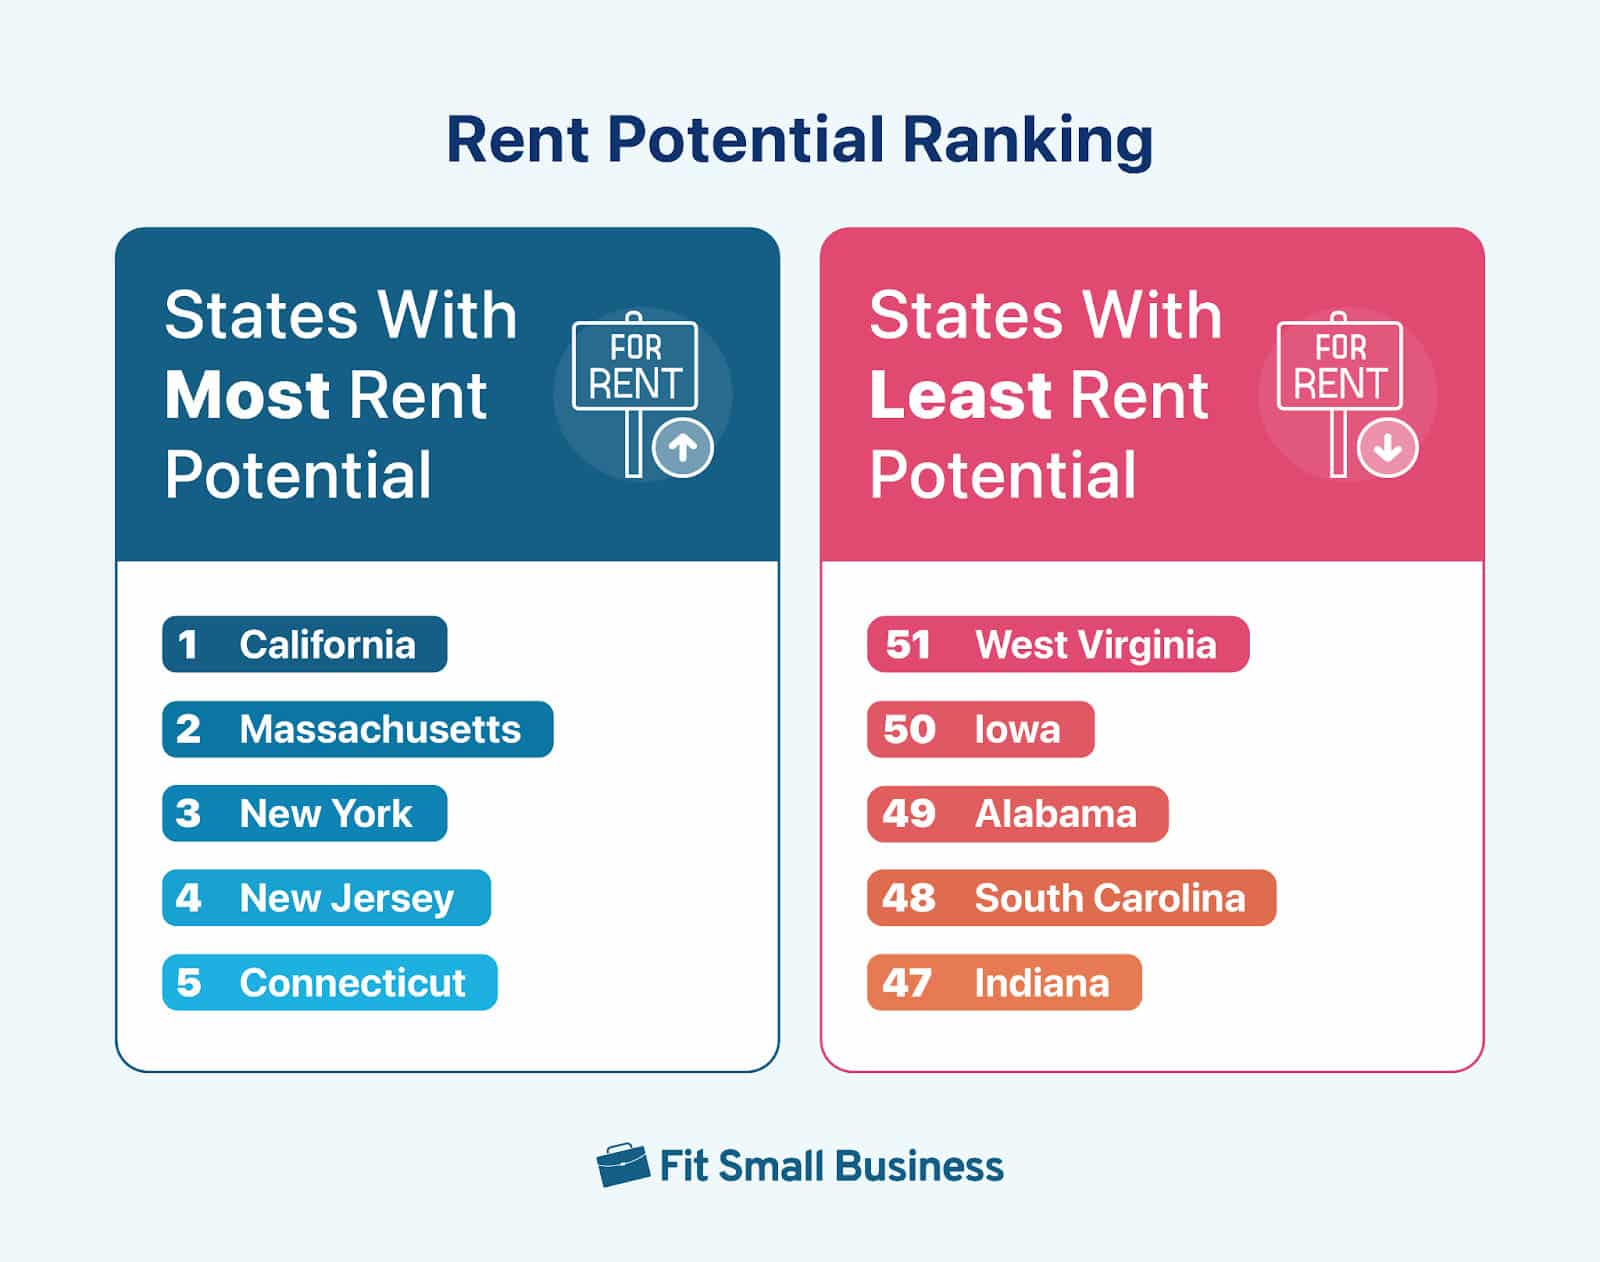 Best and worst five states ranking for rent potential.